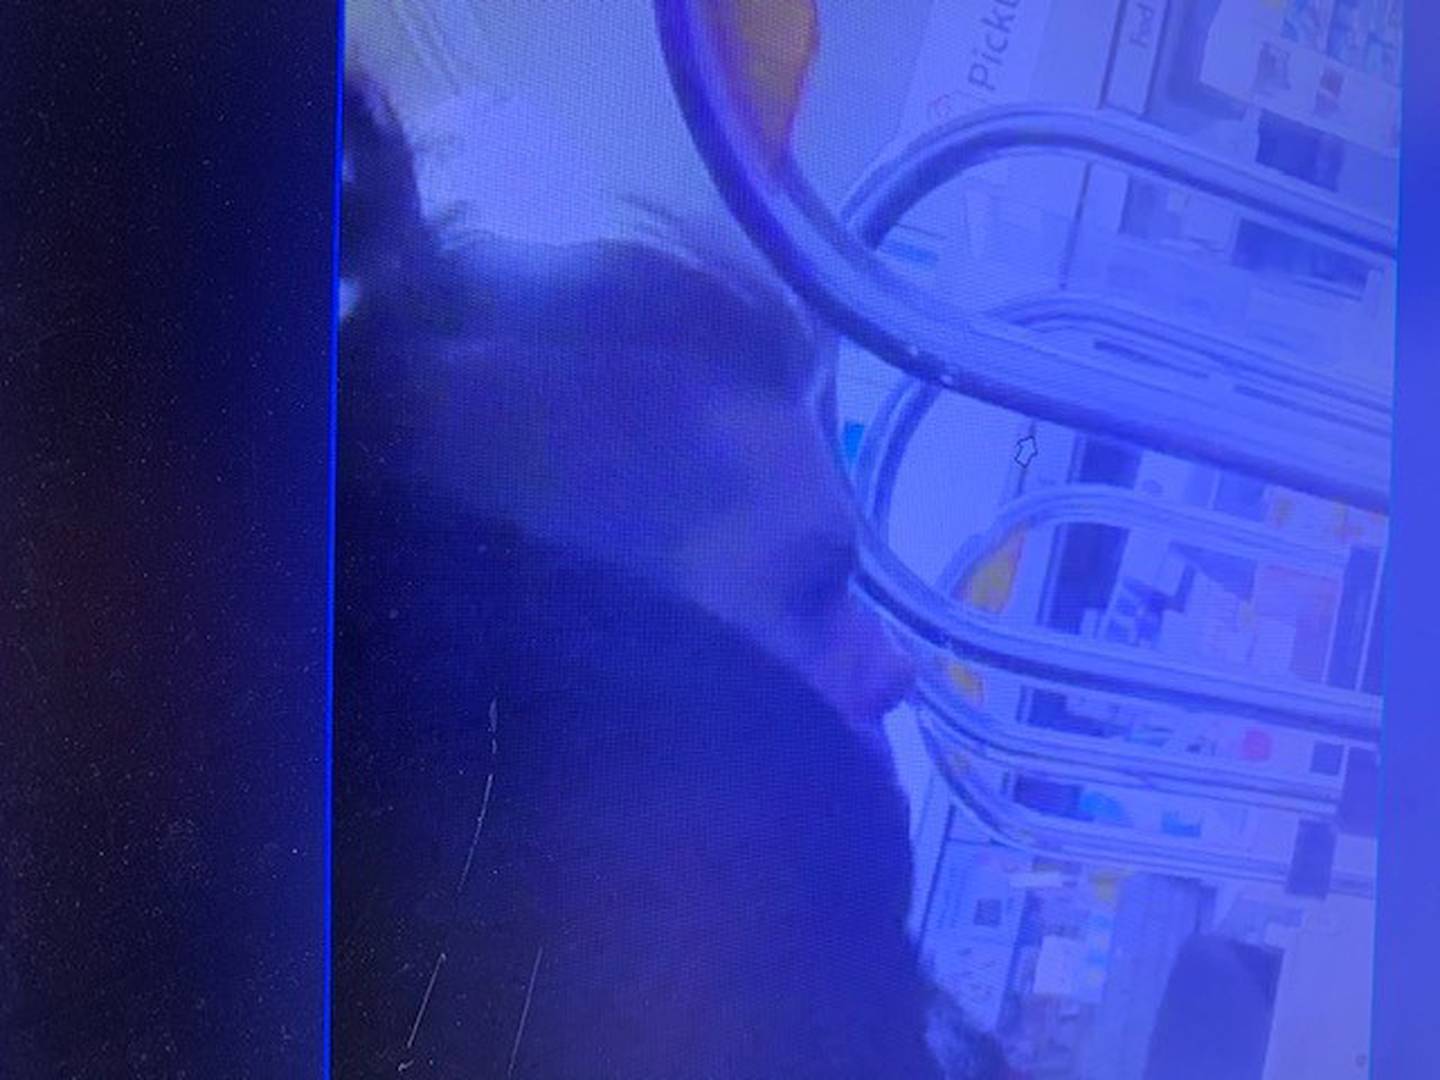 The Cary Police Department is asking for the public's help in identifying two male subjects following the burglary of a Walgreens store. One of the subjects was wearing black pants with a dark-colored Tommy Hilfiger sweatshirt. He had brown hair in a bun style with short sides, and his age could range from 20 to 30.